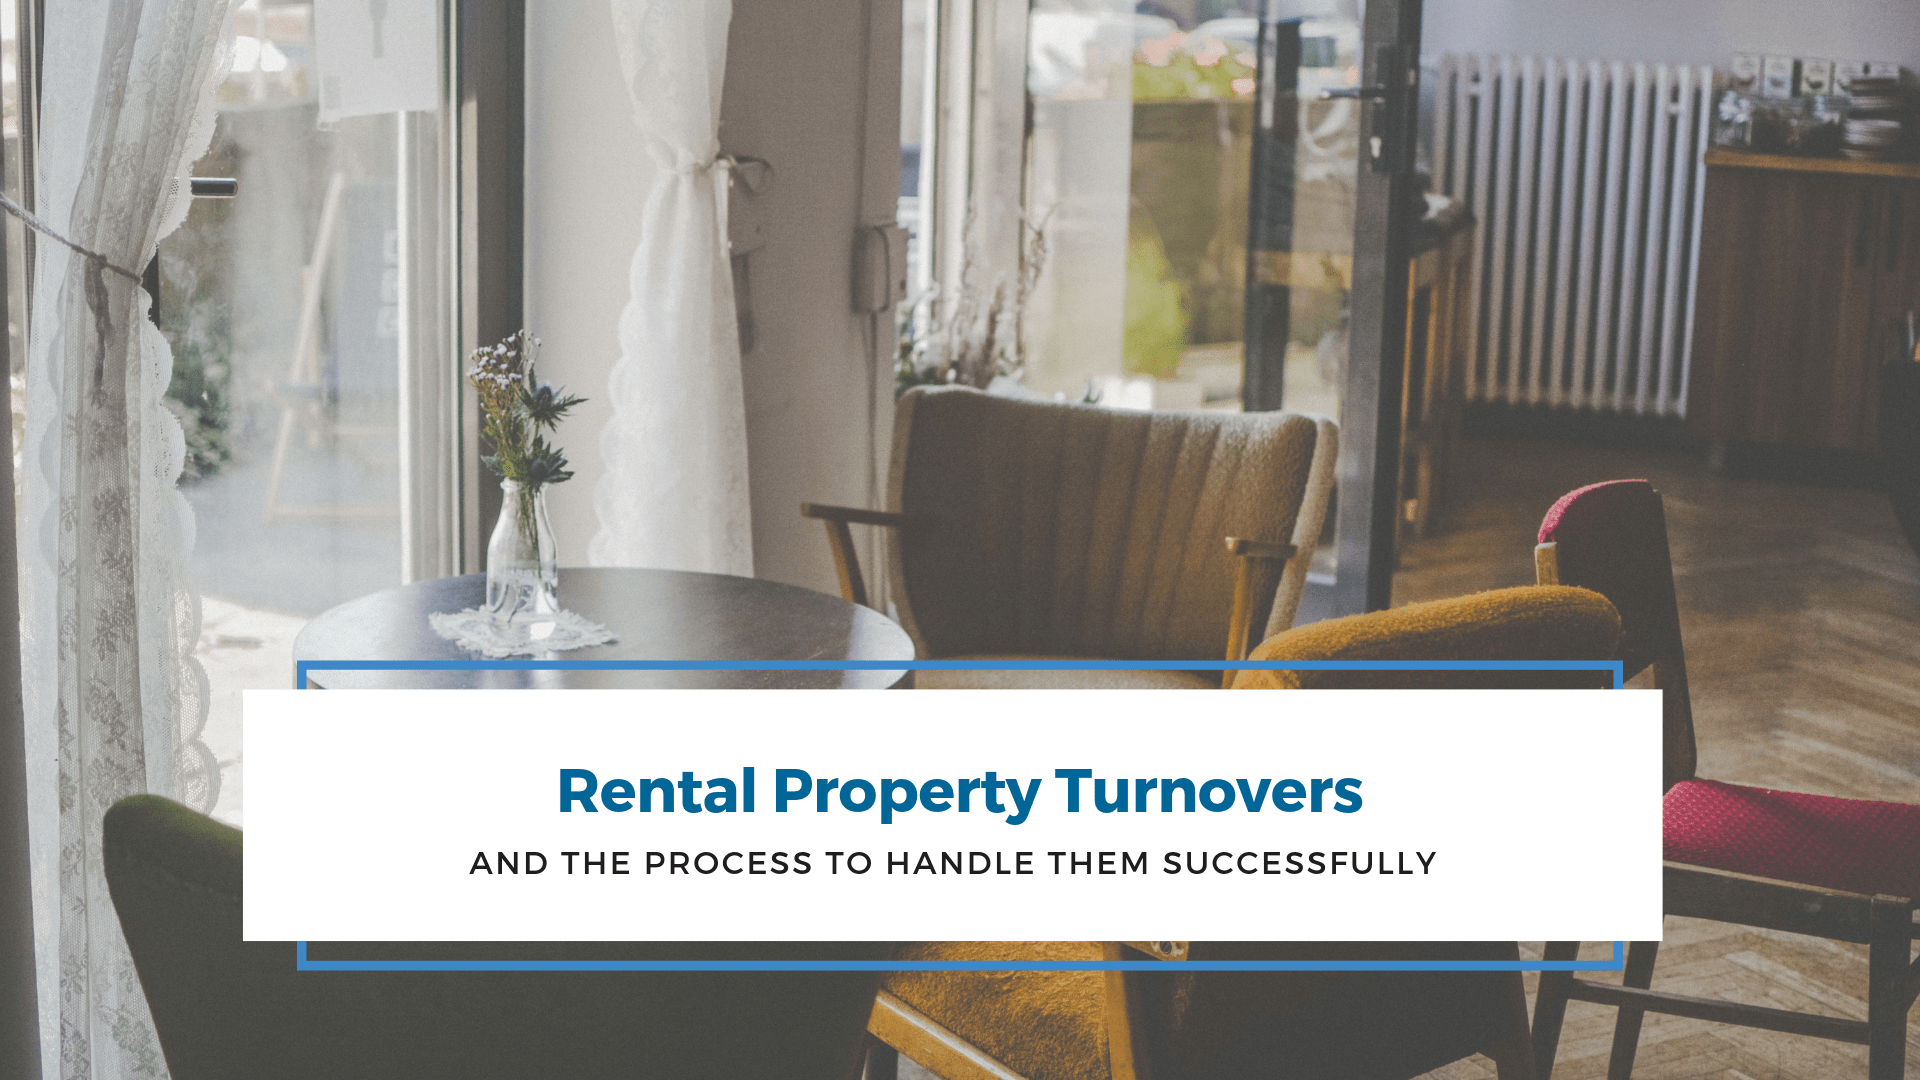 Grand Rapids Rental Property Turnovers and the Process to Handle Them Successfully